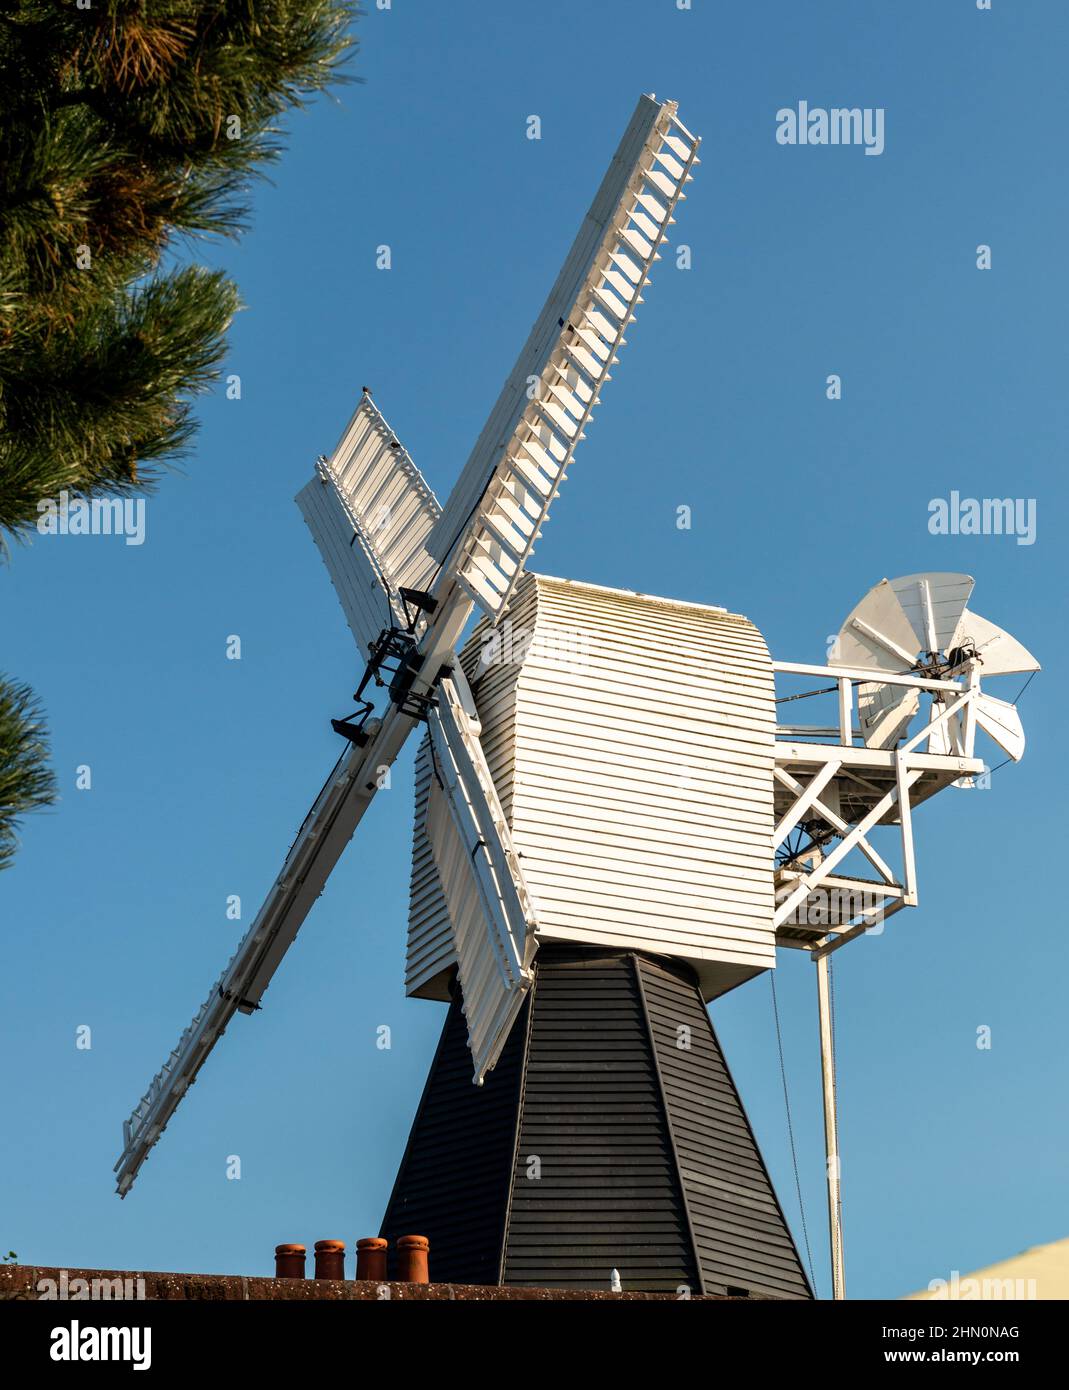 The old windmill on Wimbledon Common in London Stock Photo